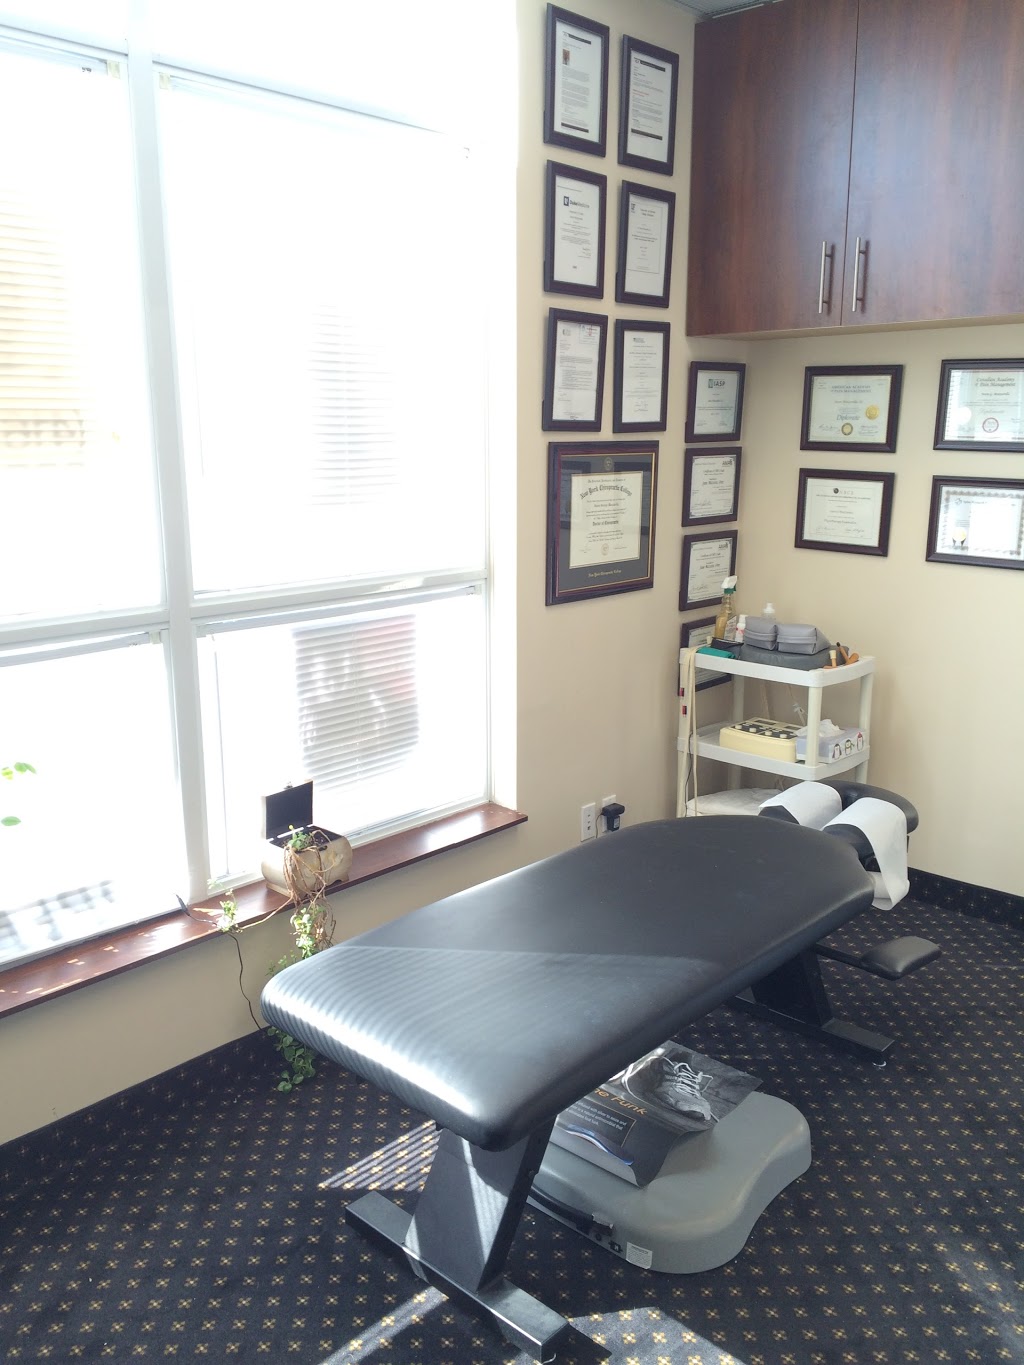 North American Spine Institute | 28 Finch Ave W Suite 212, North York, ON M2N 2G7, Canada | Phone: (647) 991-7246